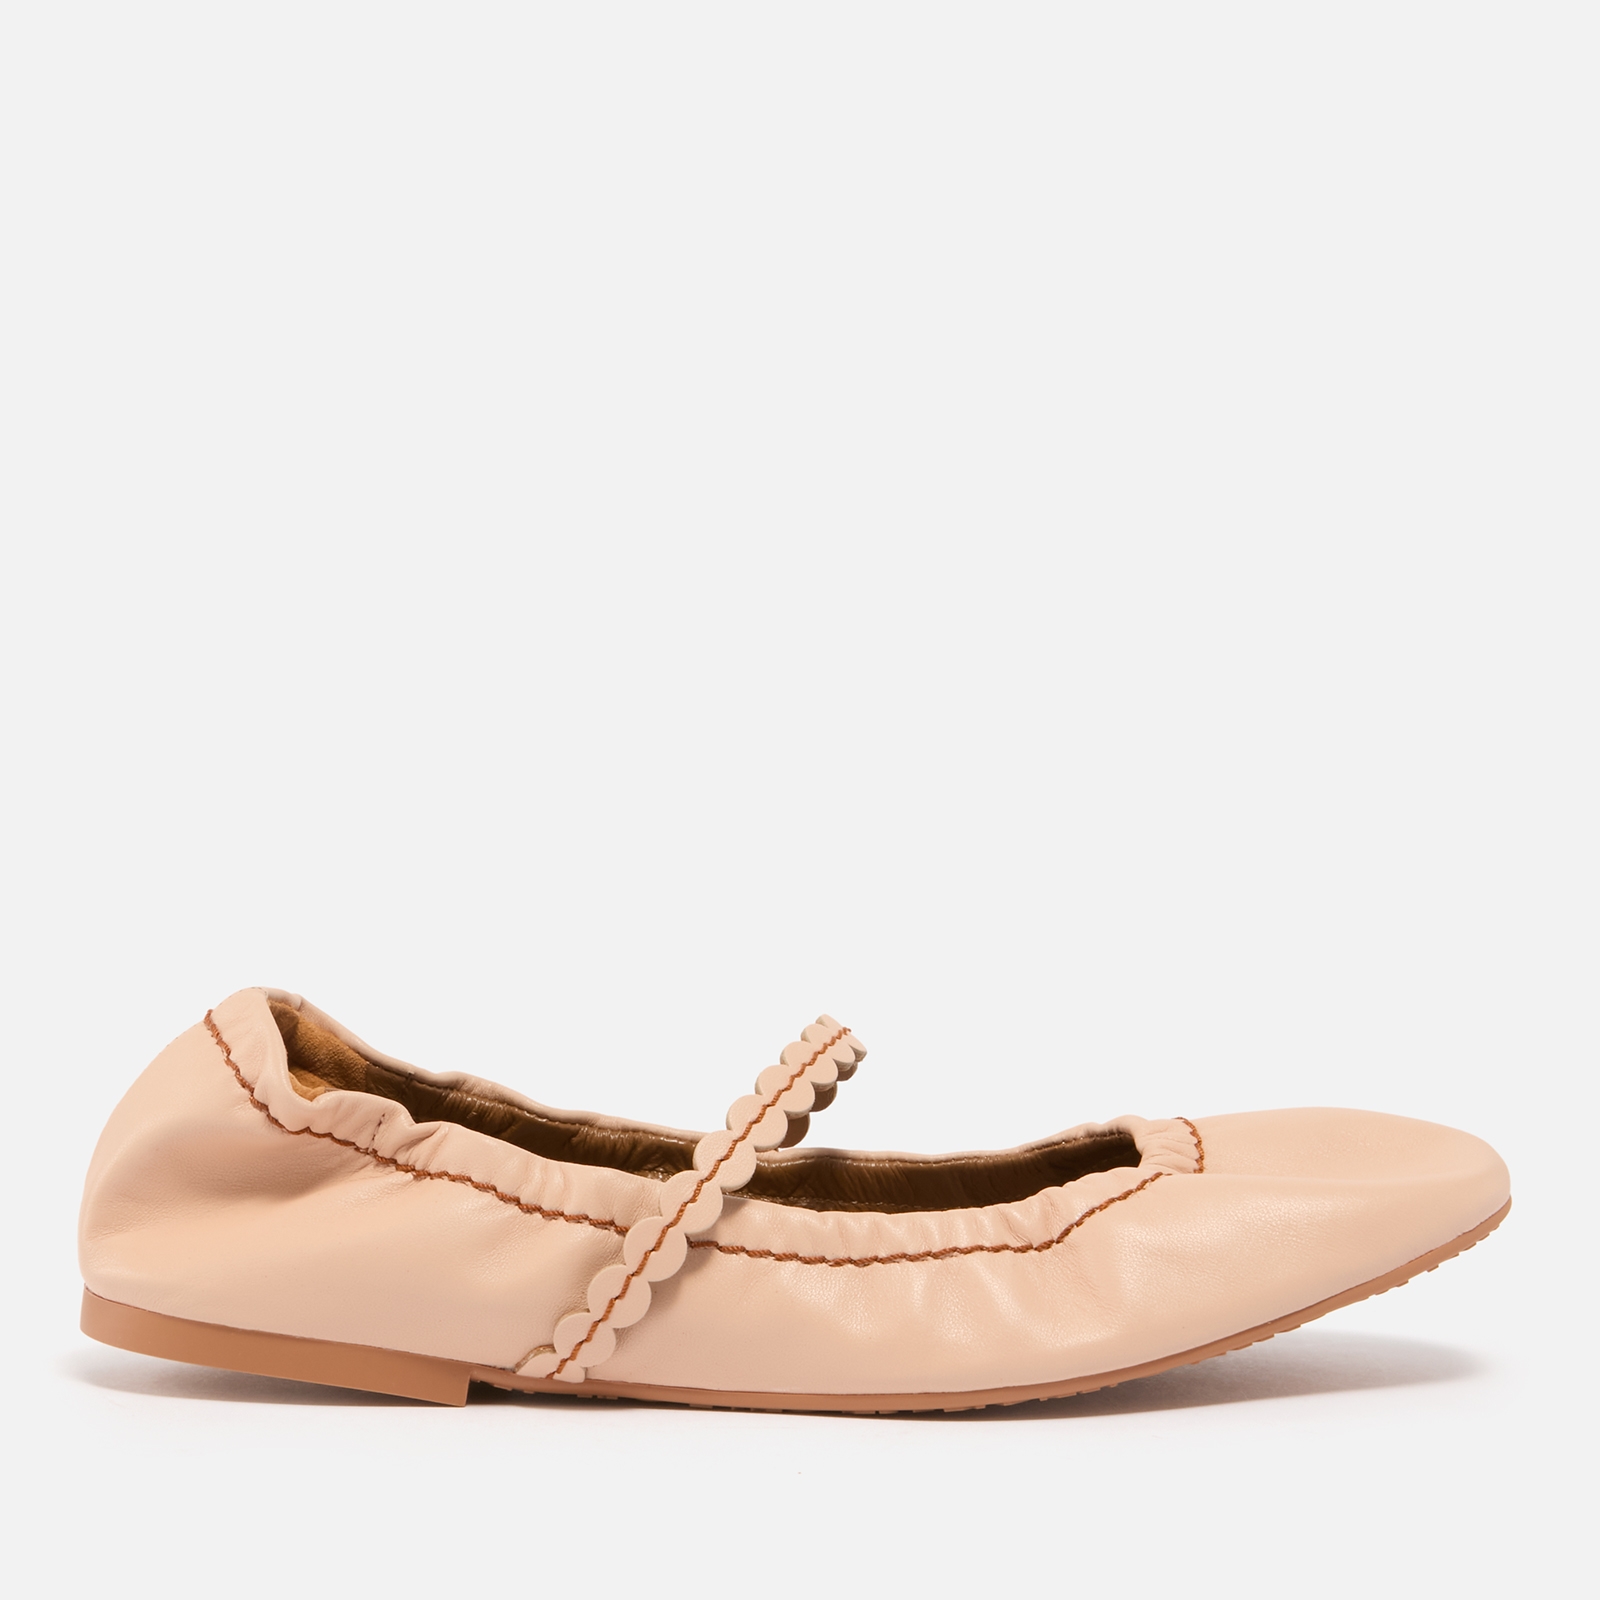 See By Chloé Women's Kaddy Leather Ballet Flats - Nude - 3